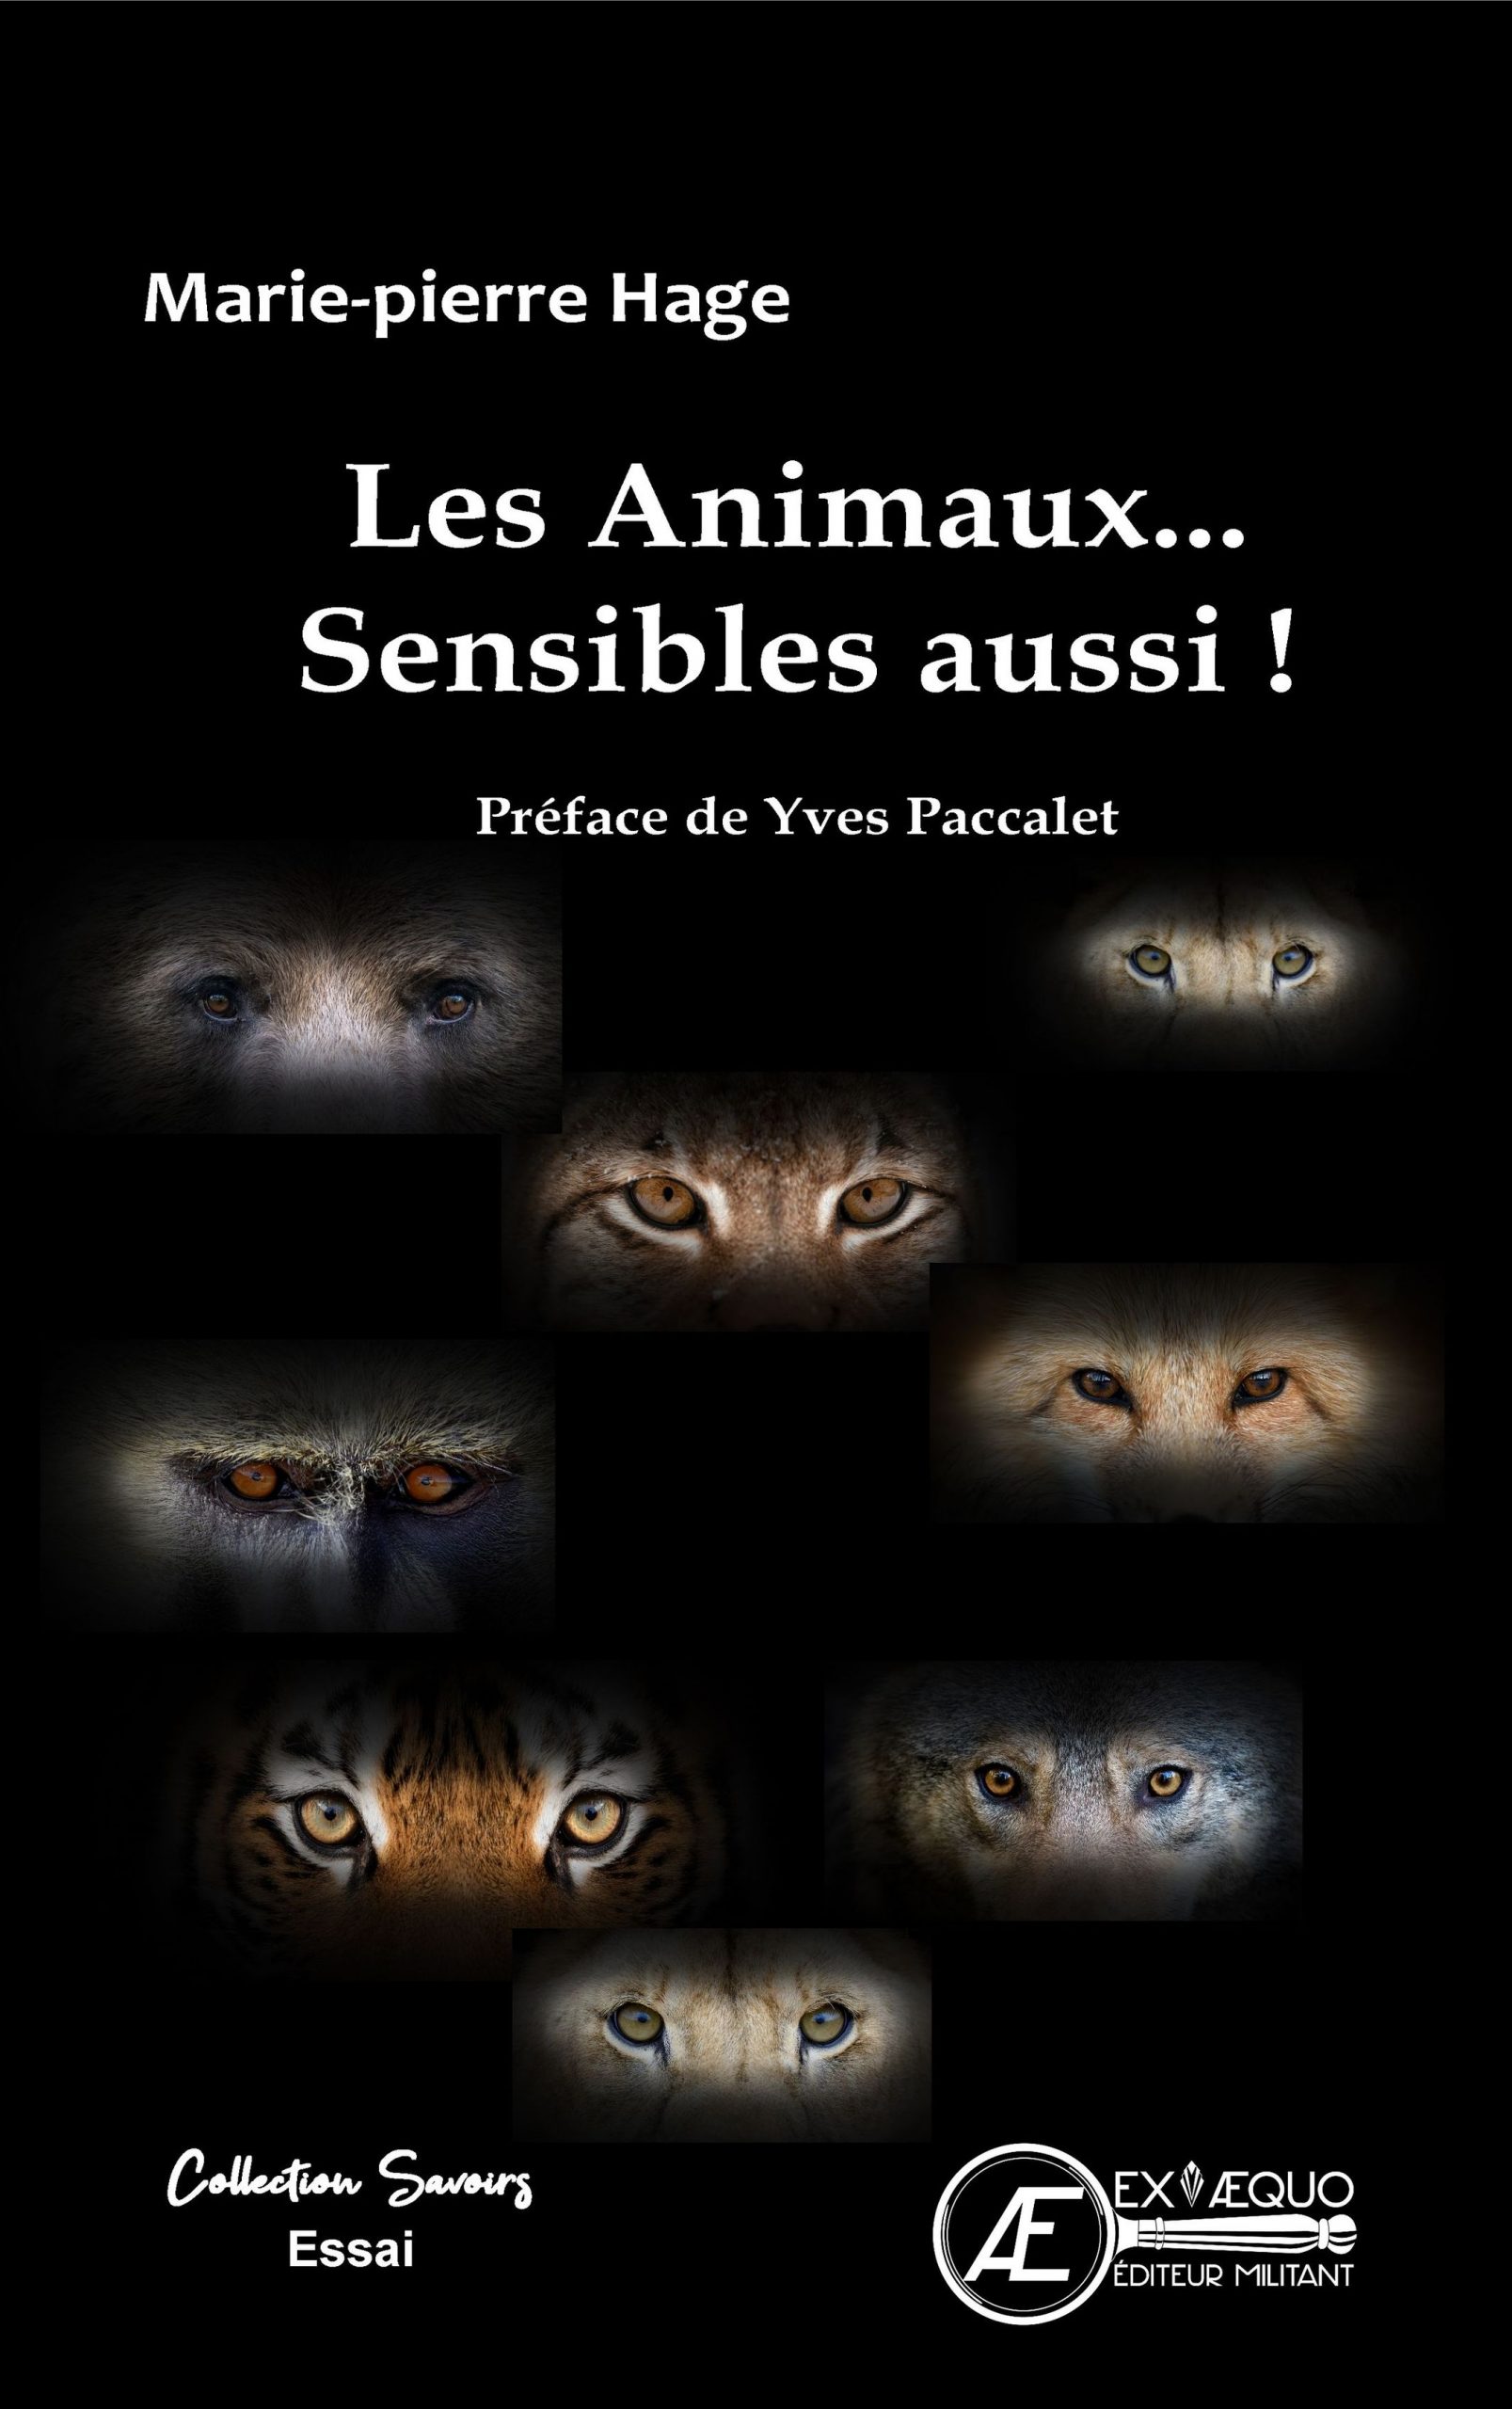 You are currently viewing Les animaux… sensibles aussi !, de Marie-Pierre Hage